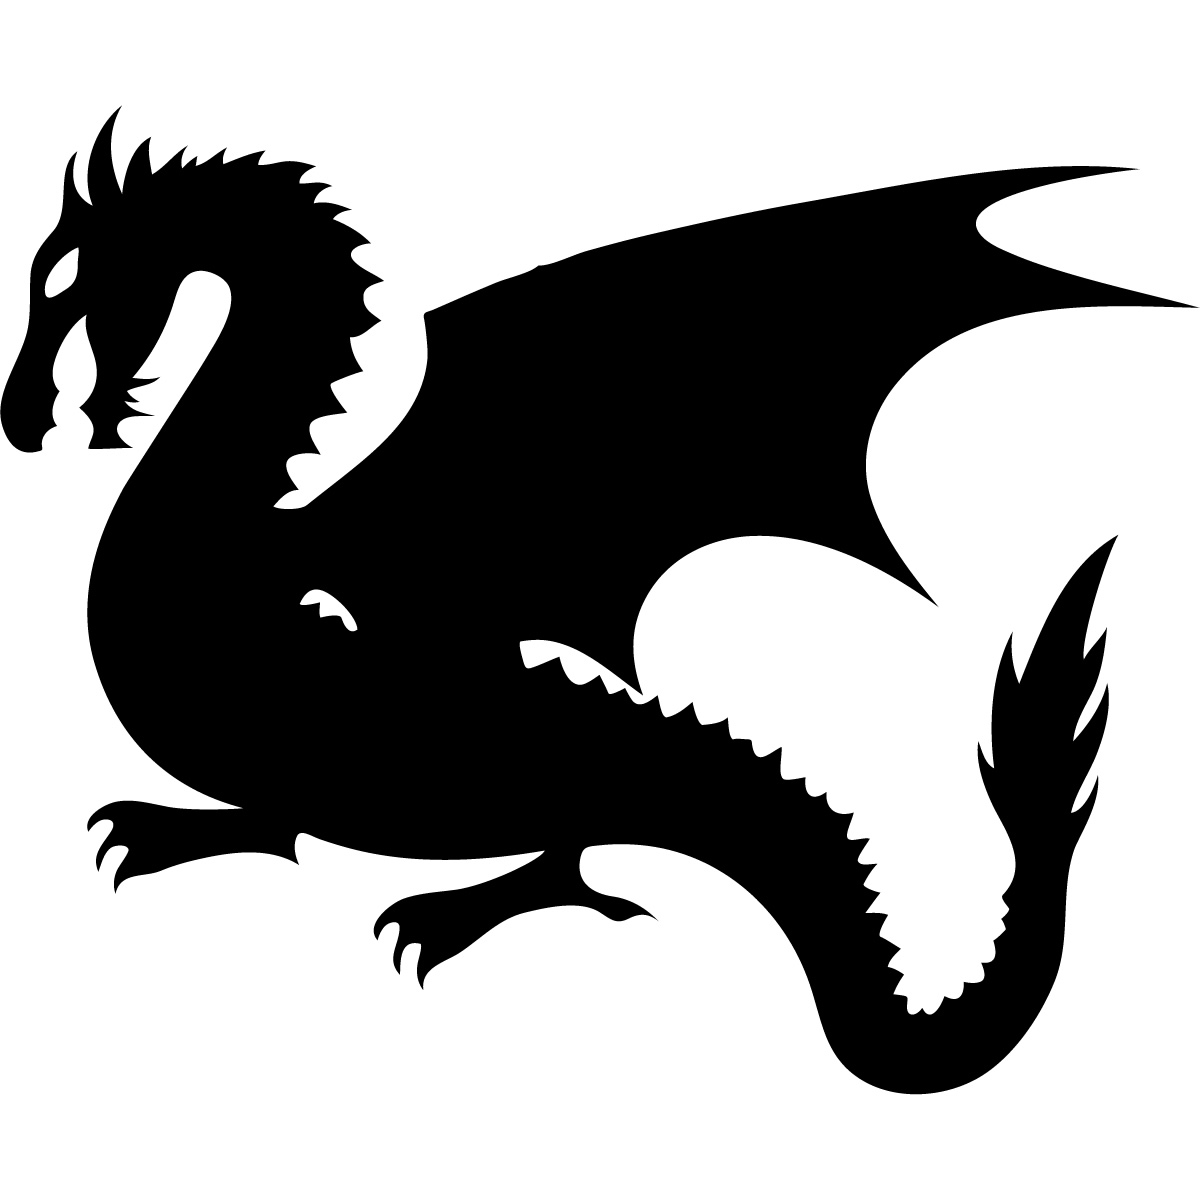 17 Dragon Silhouette Clip Art Free Cliparts That You Can Download To